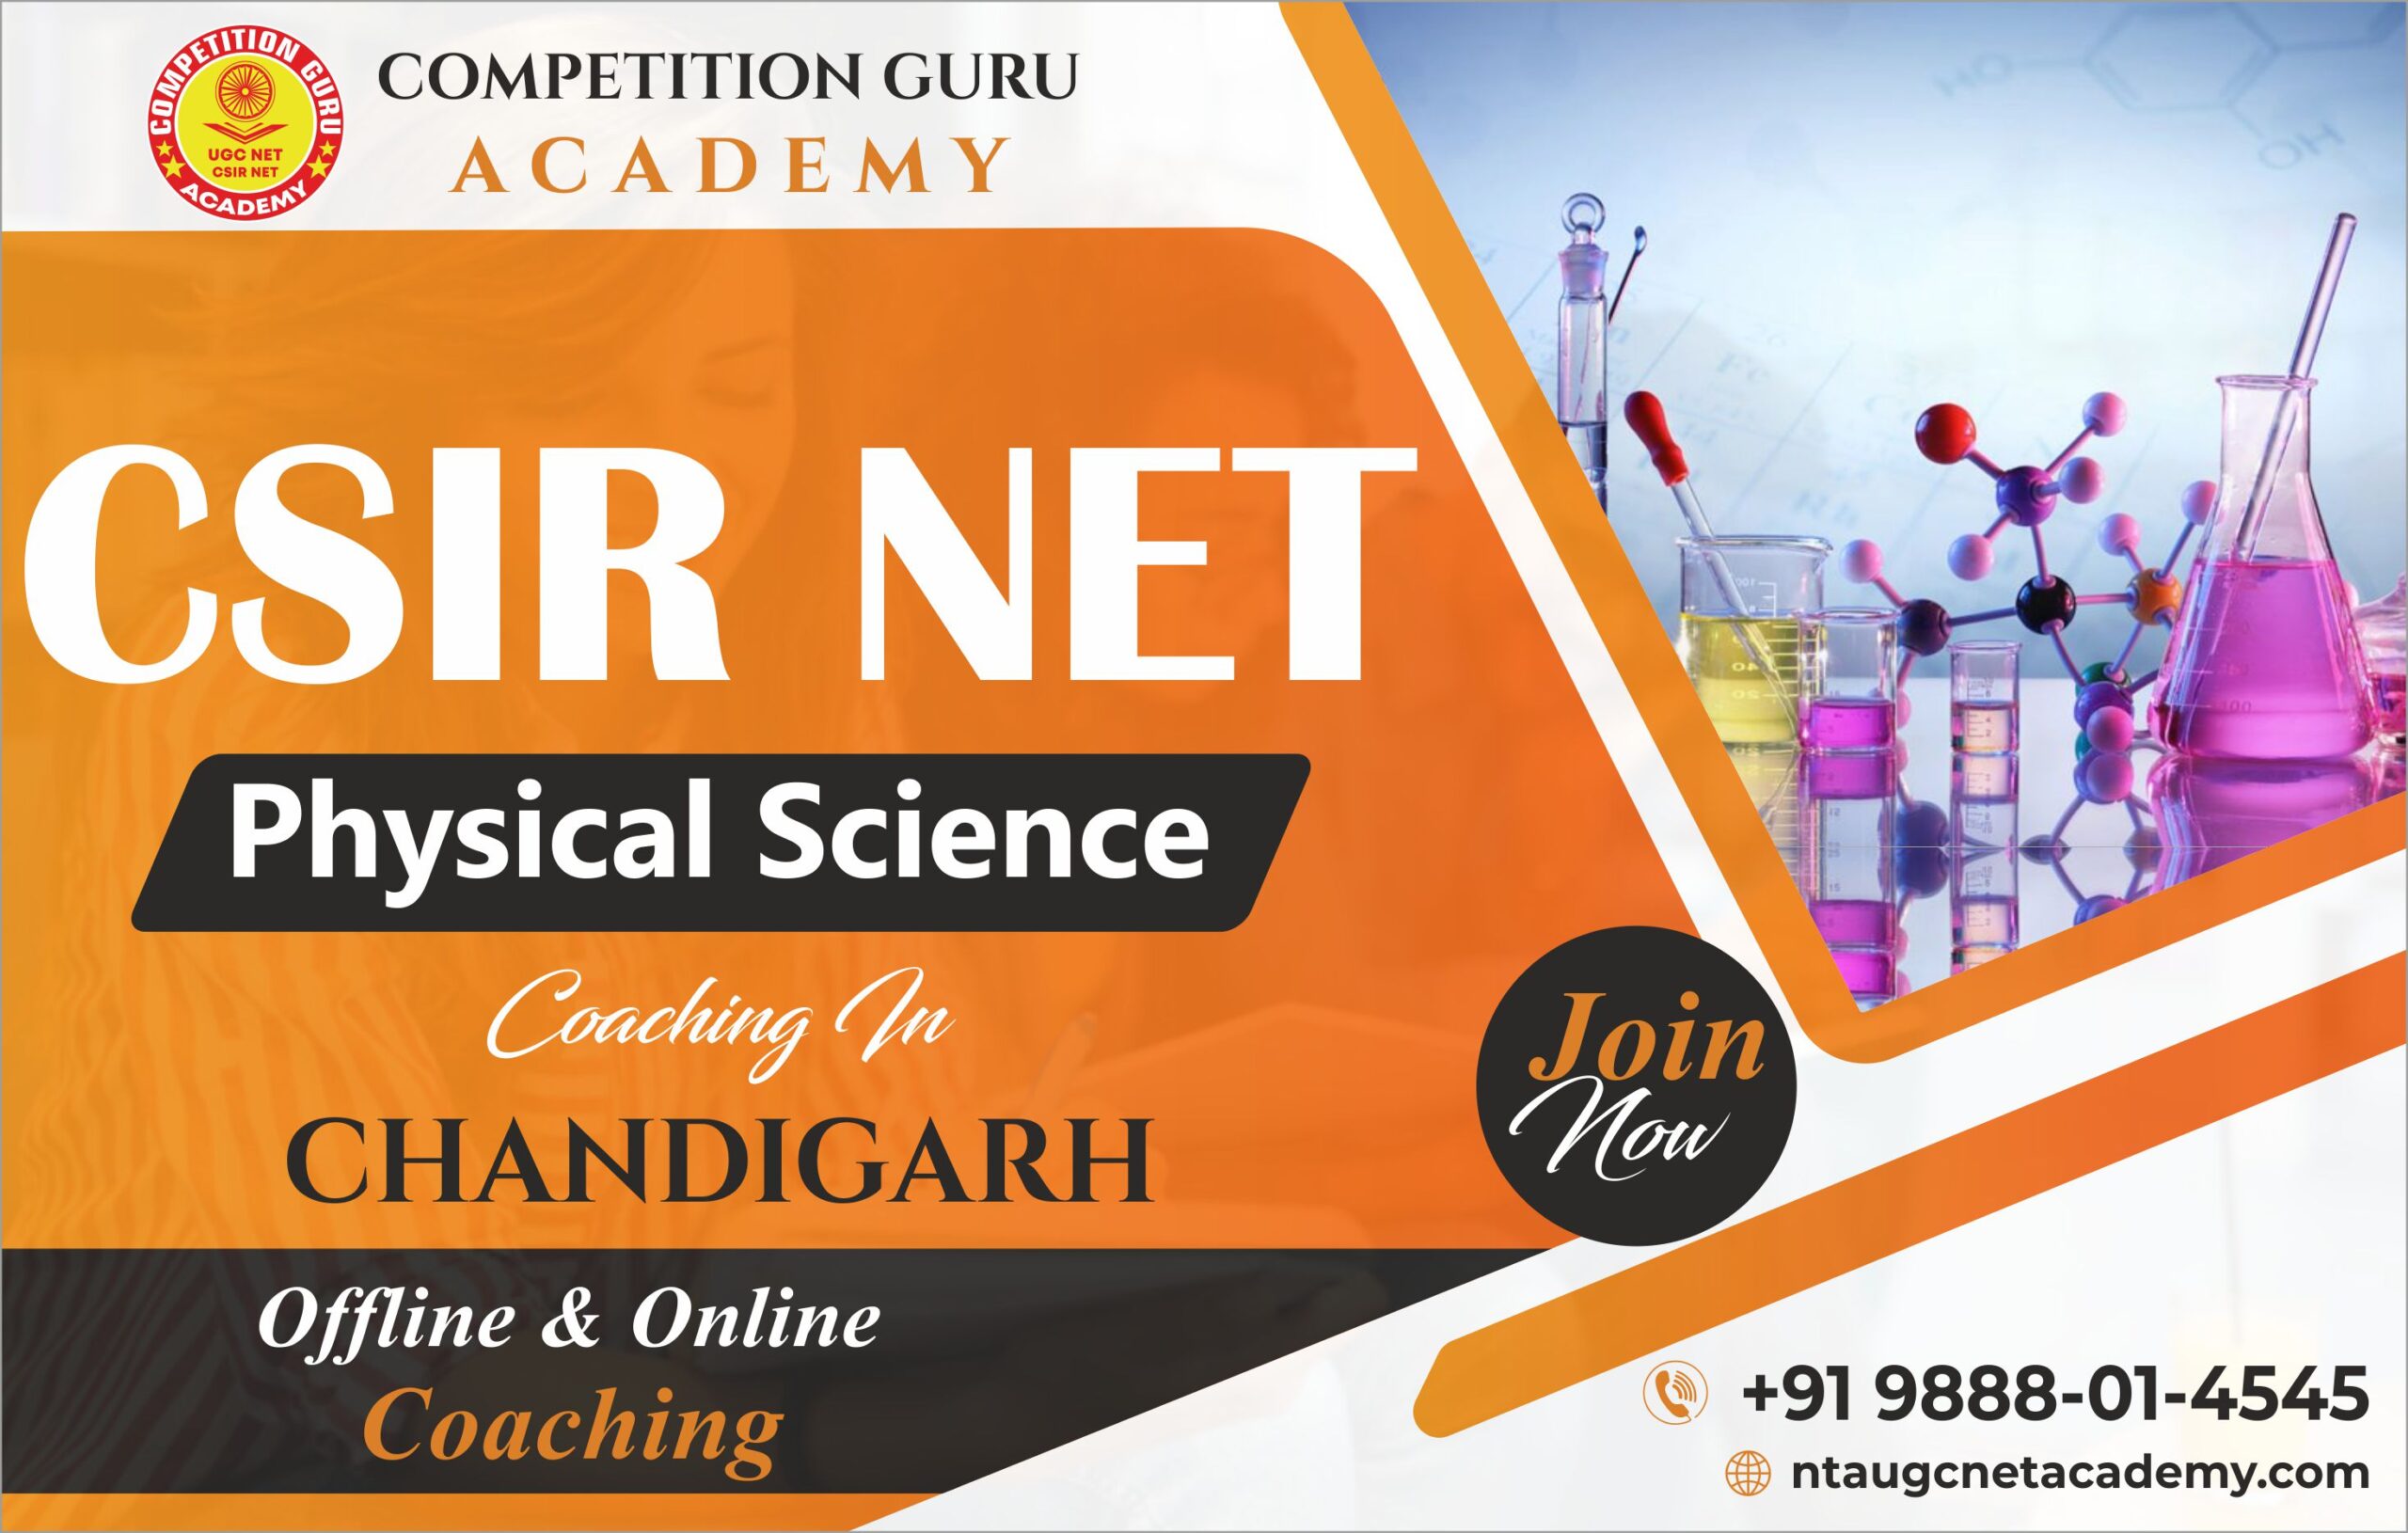 CSIR NET Physical Science Coaching in Chandigarh